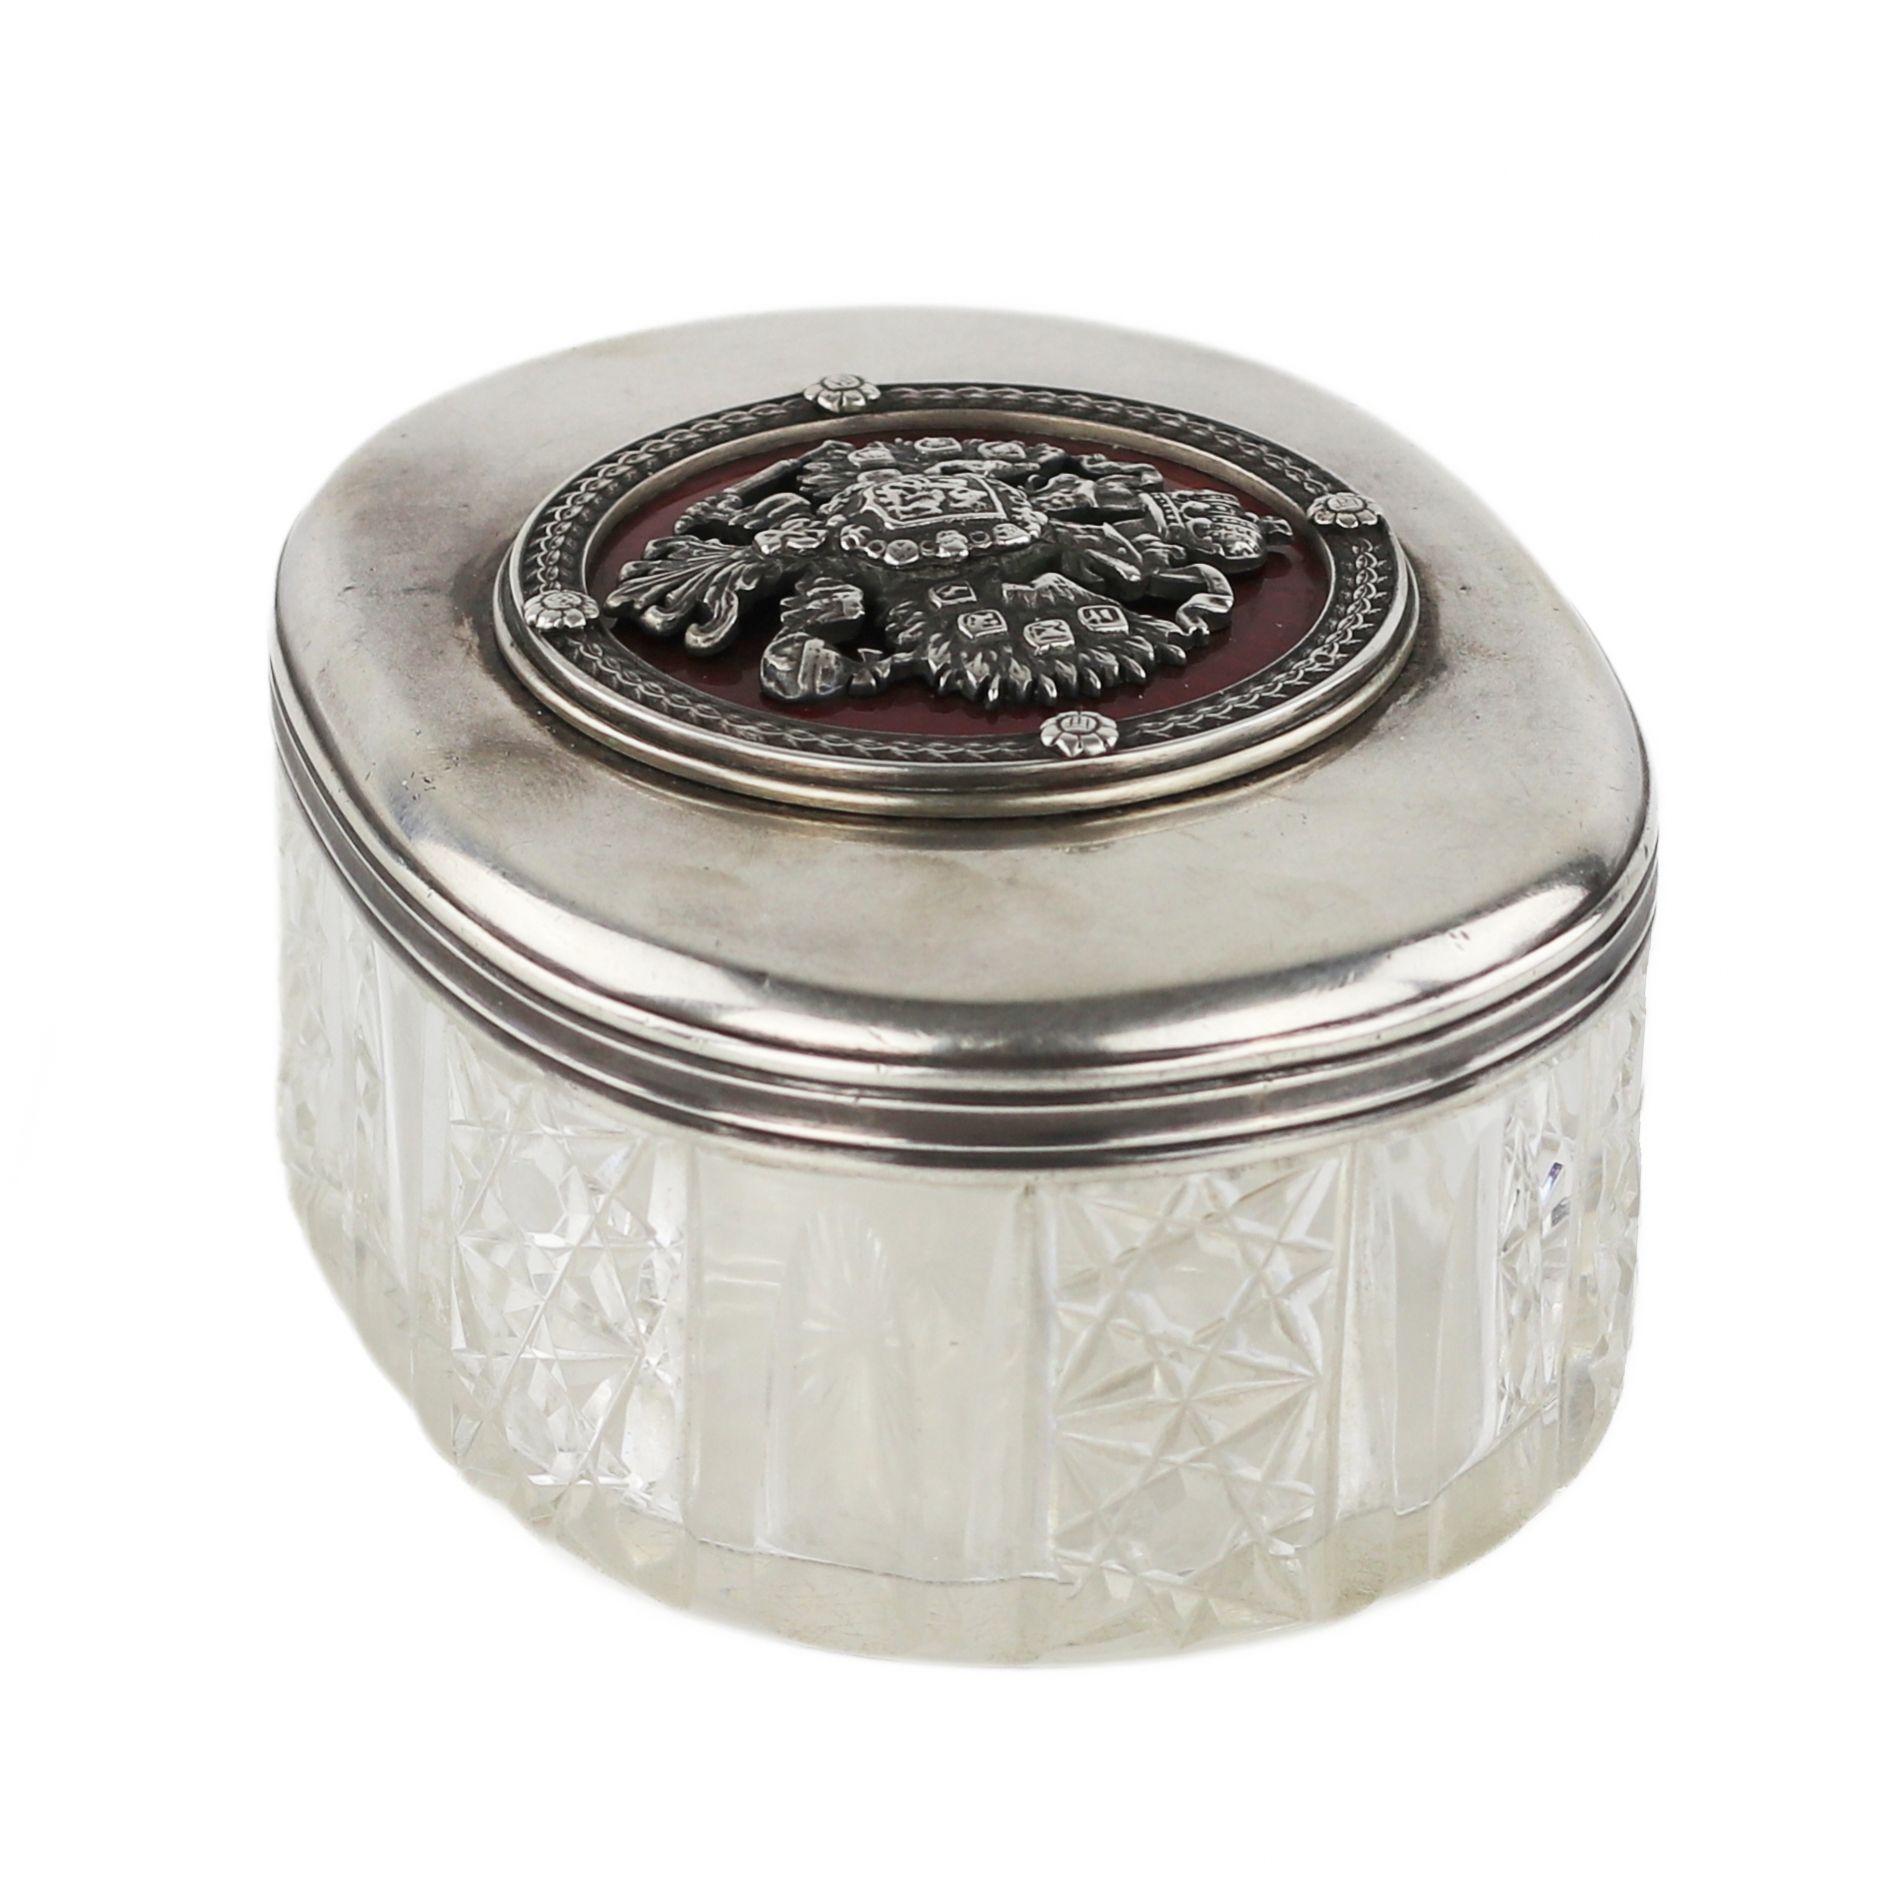 Crystal box in silver with the coat of arms of Russia on the lid. Early 20th century. - Image 3 of 6